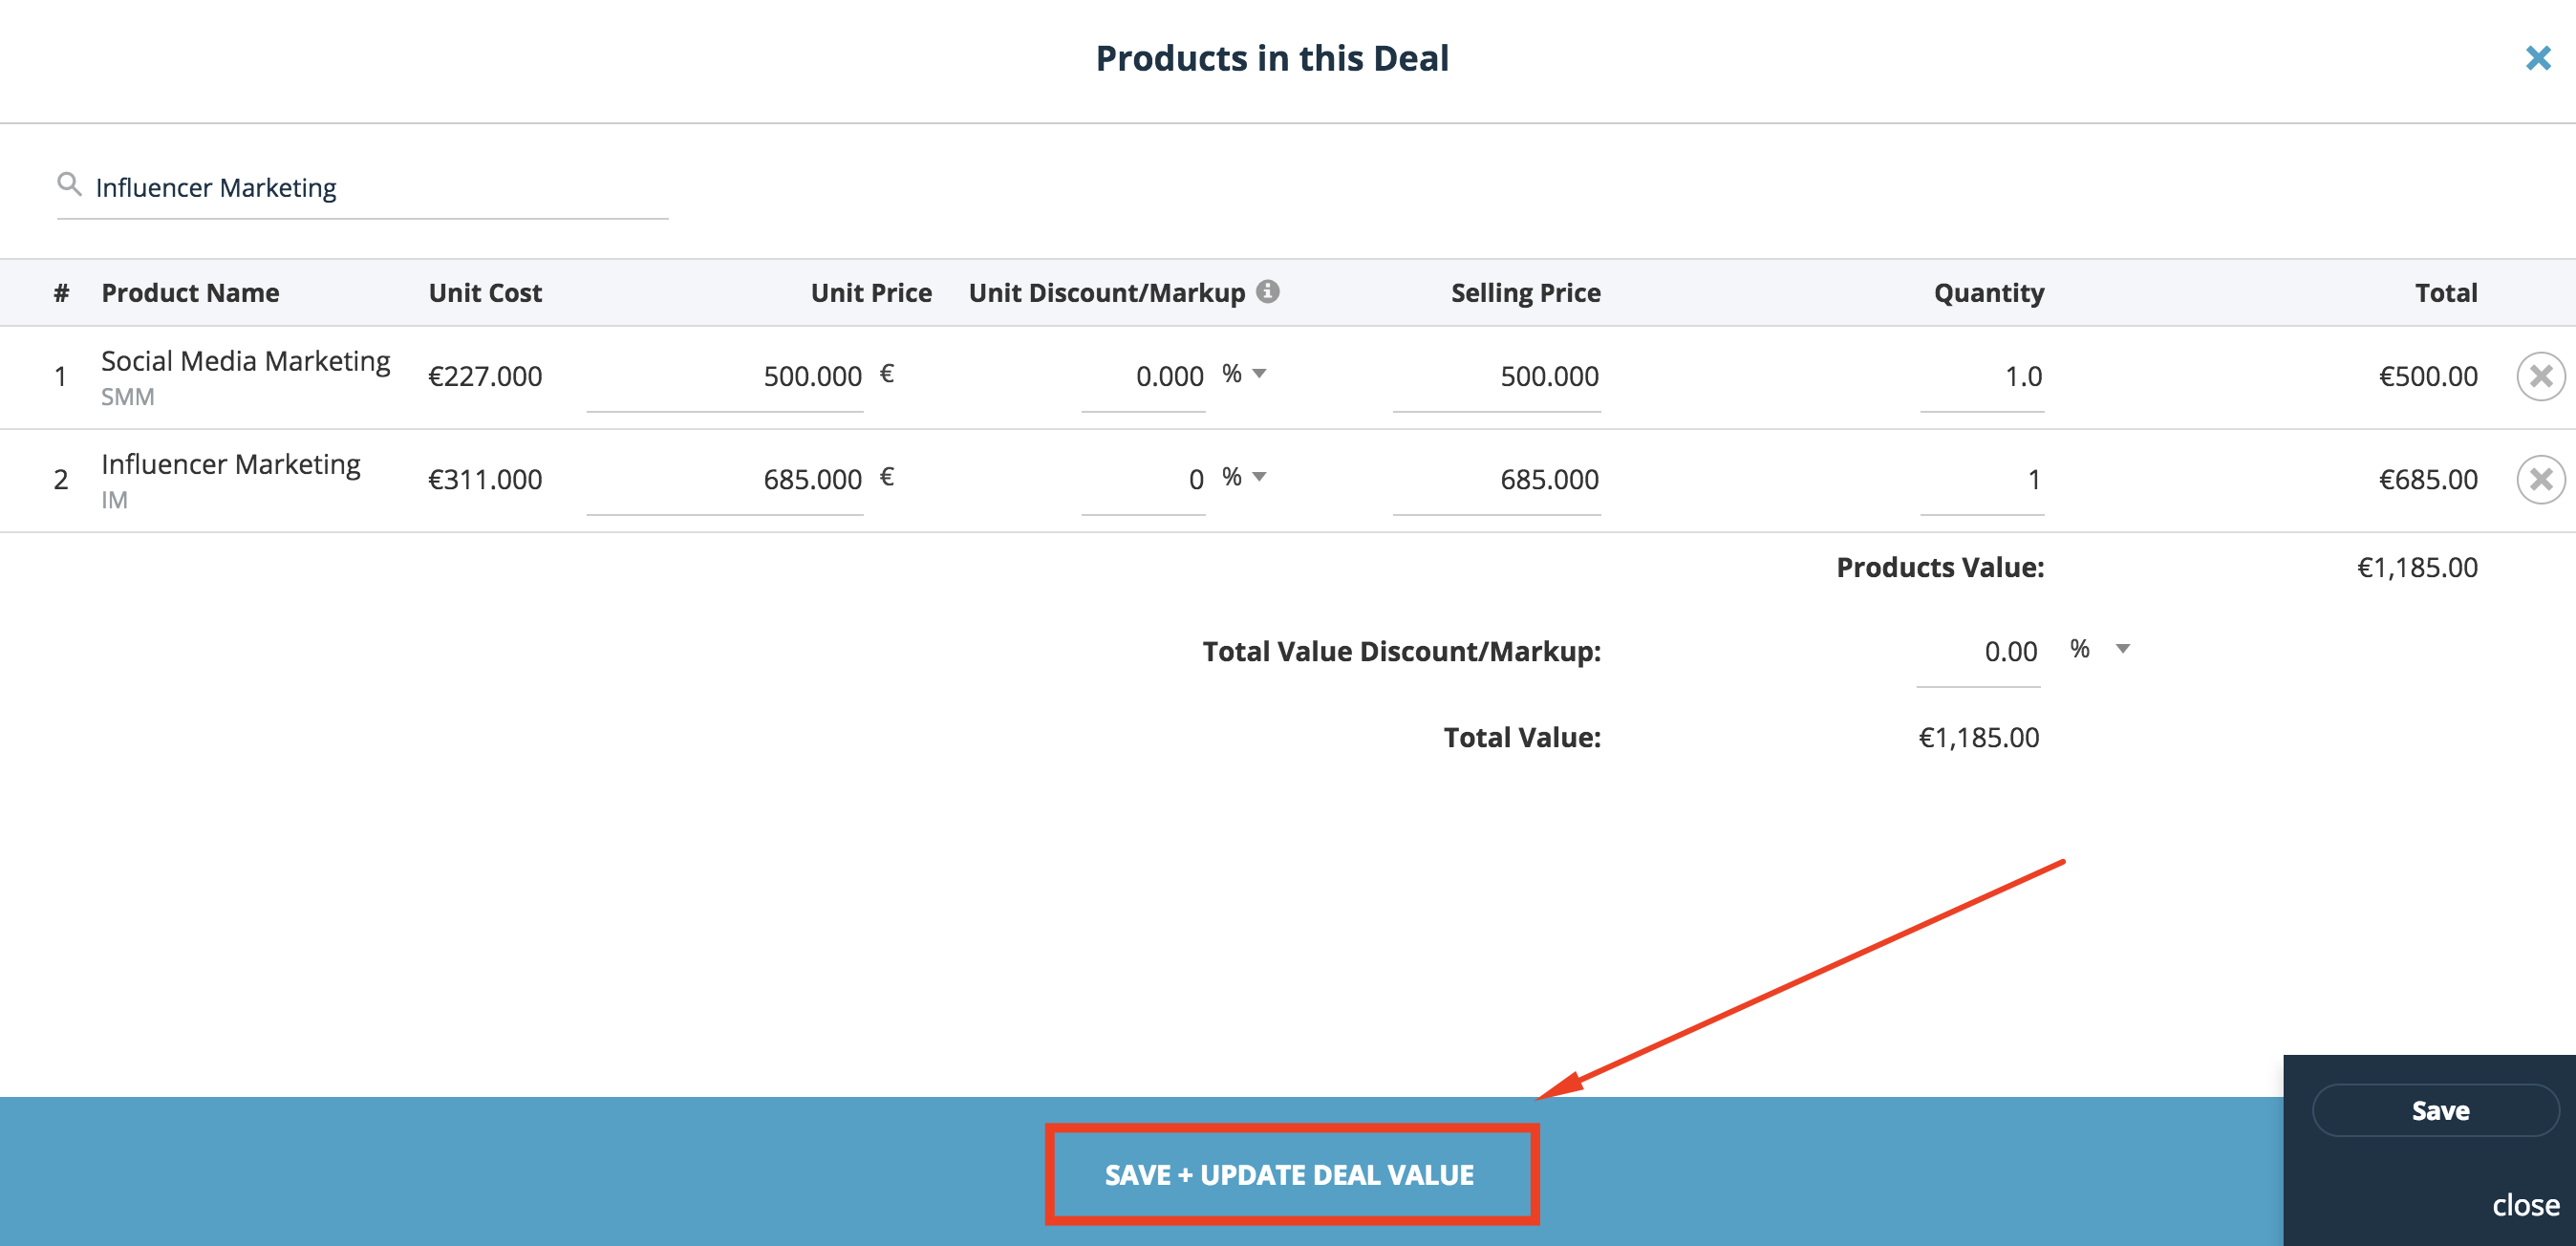 products-in-this-deal-save-and-update-deal-value-Teamgate-CRM.png